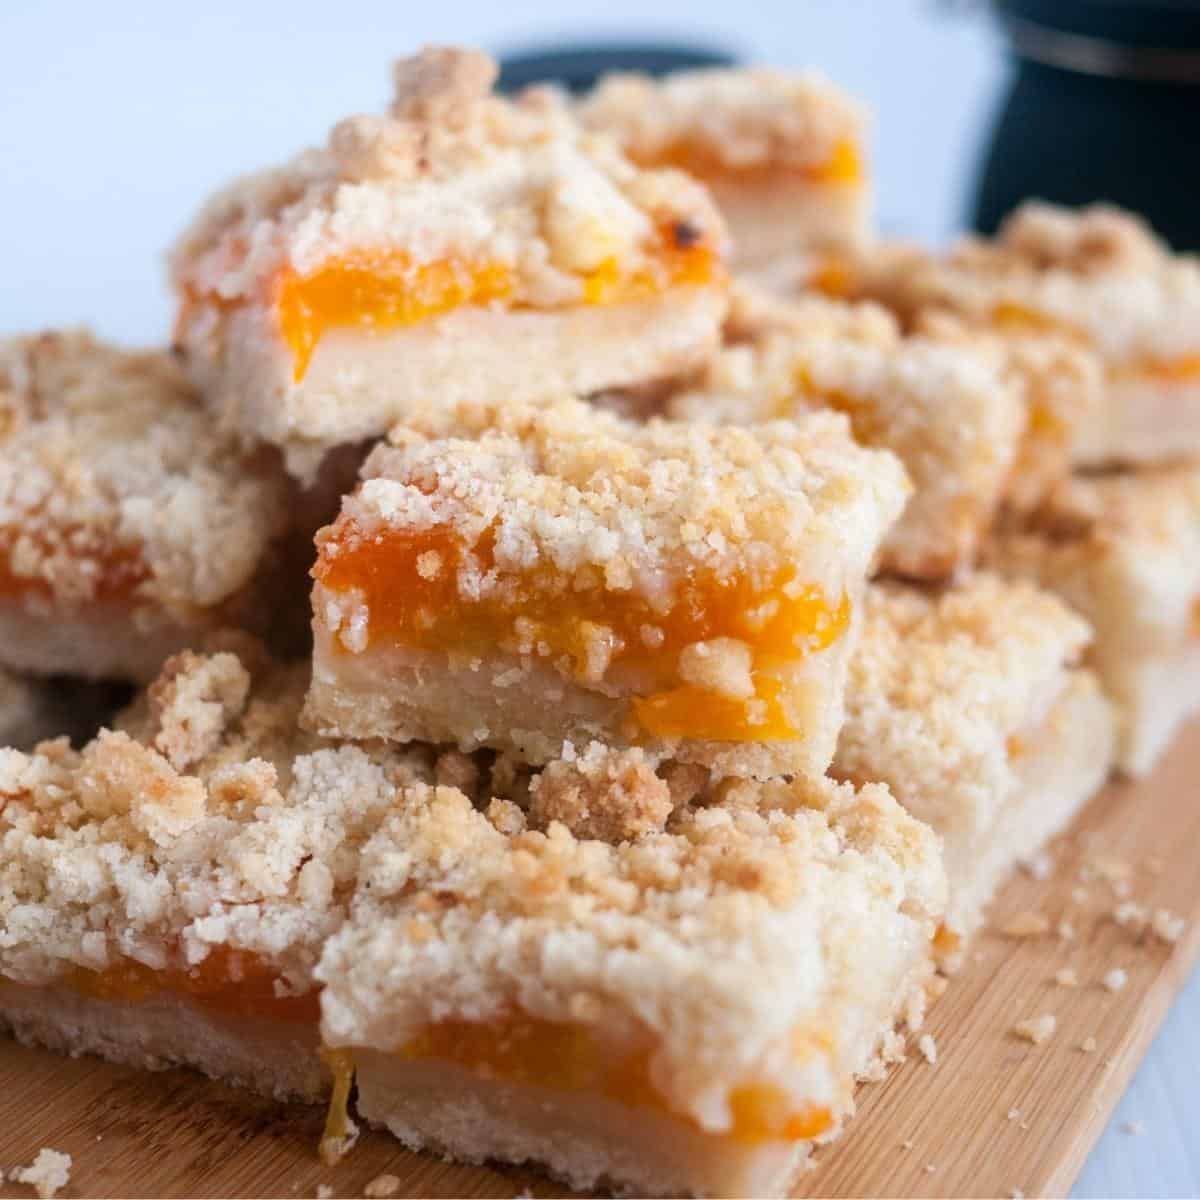 Apricot bars on a wooden board.